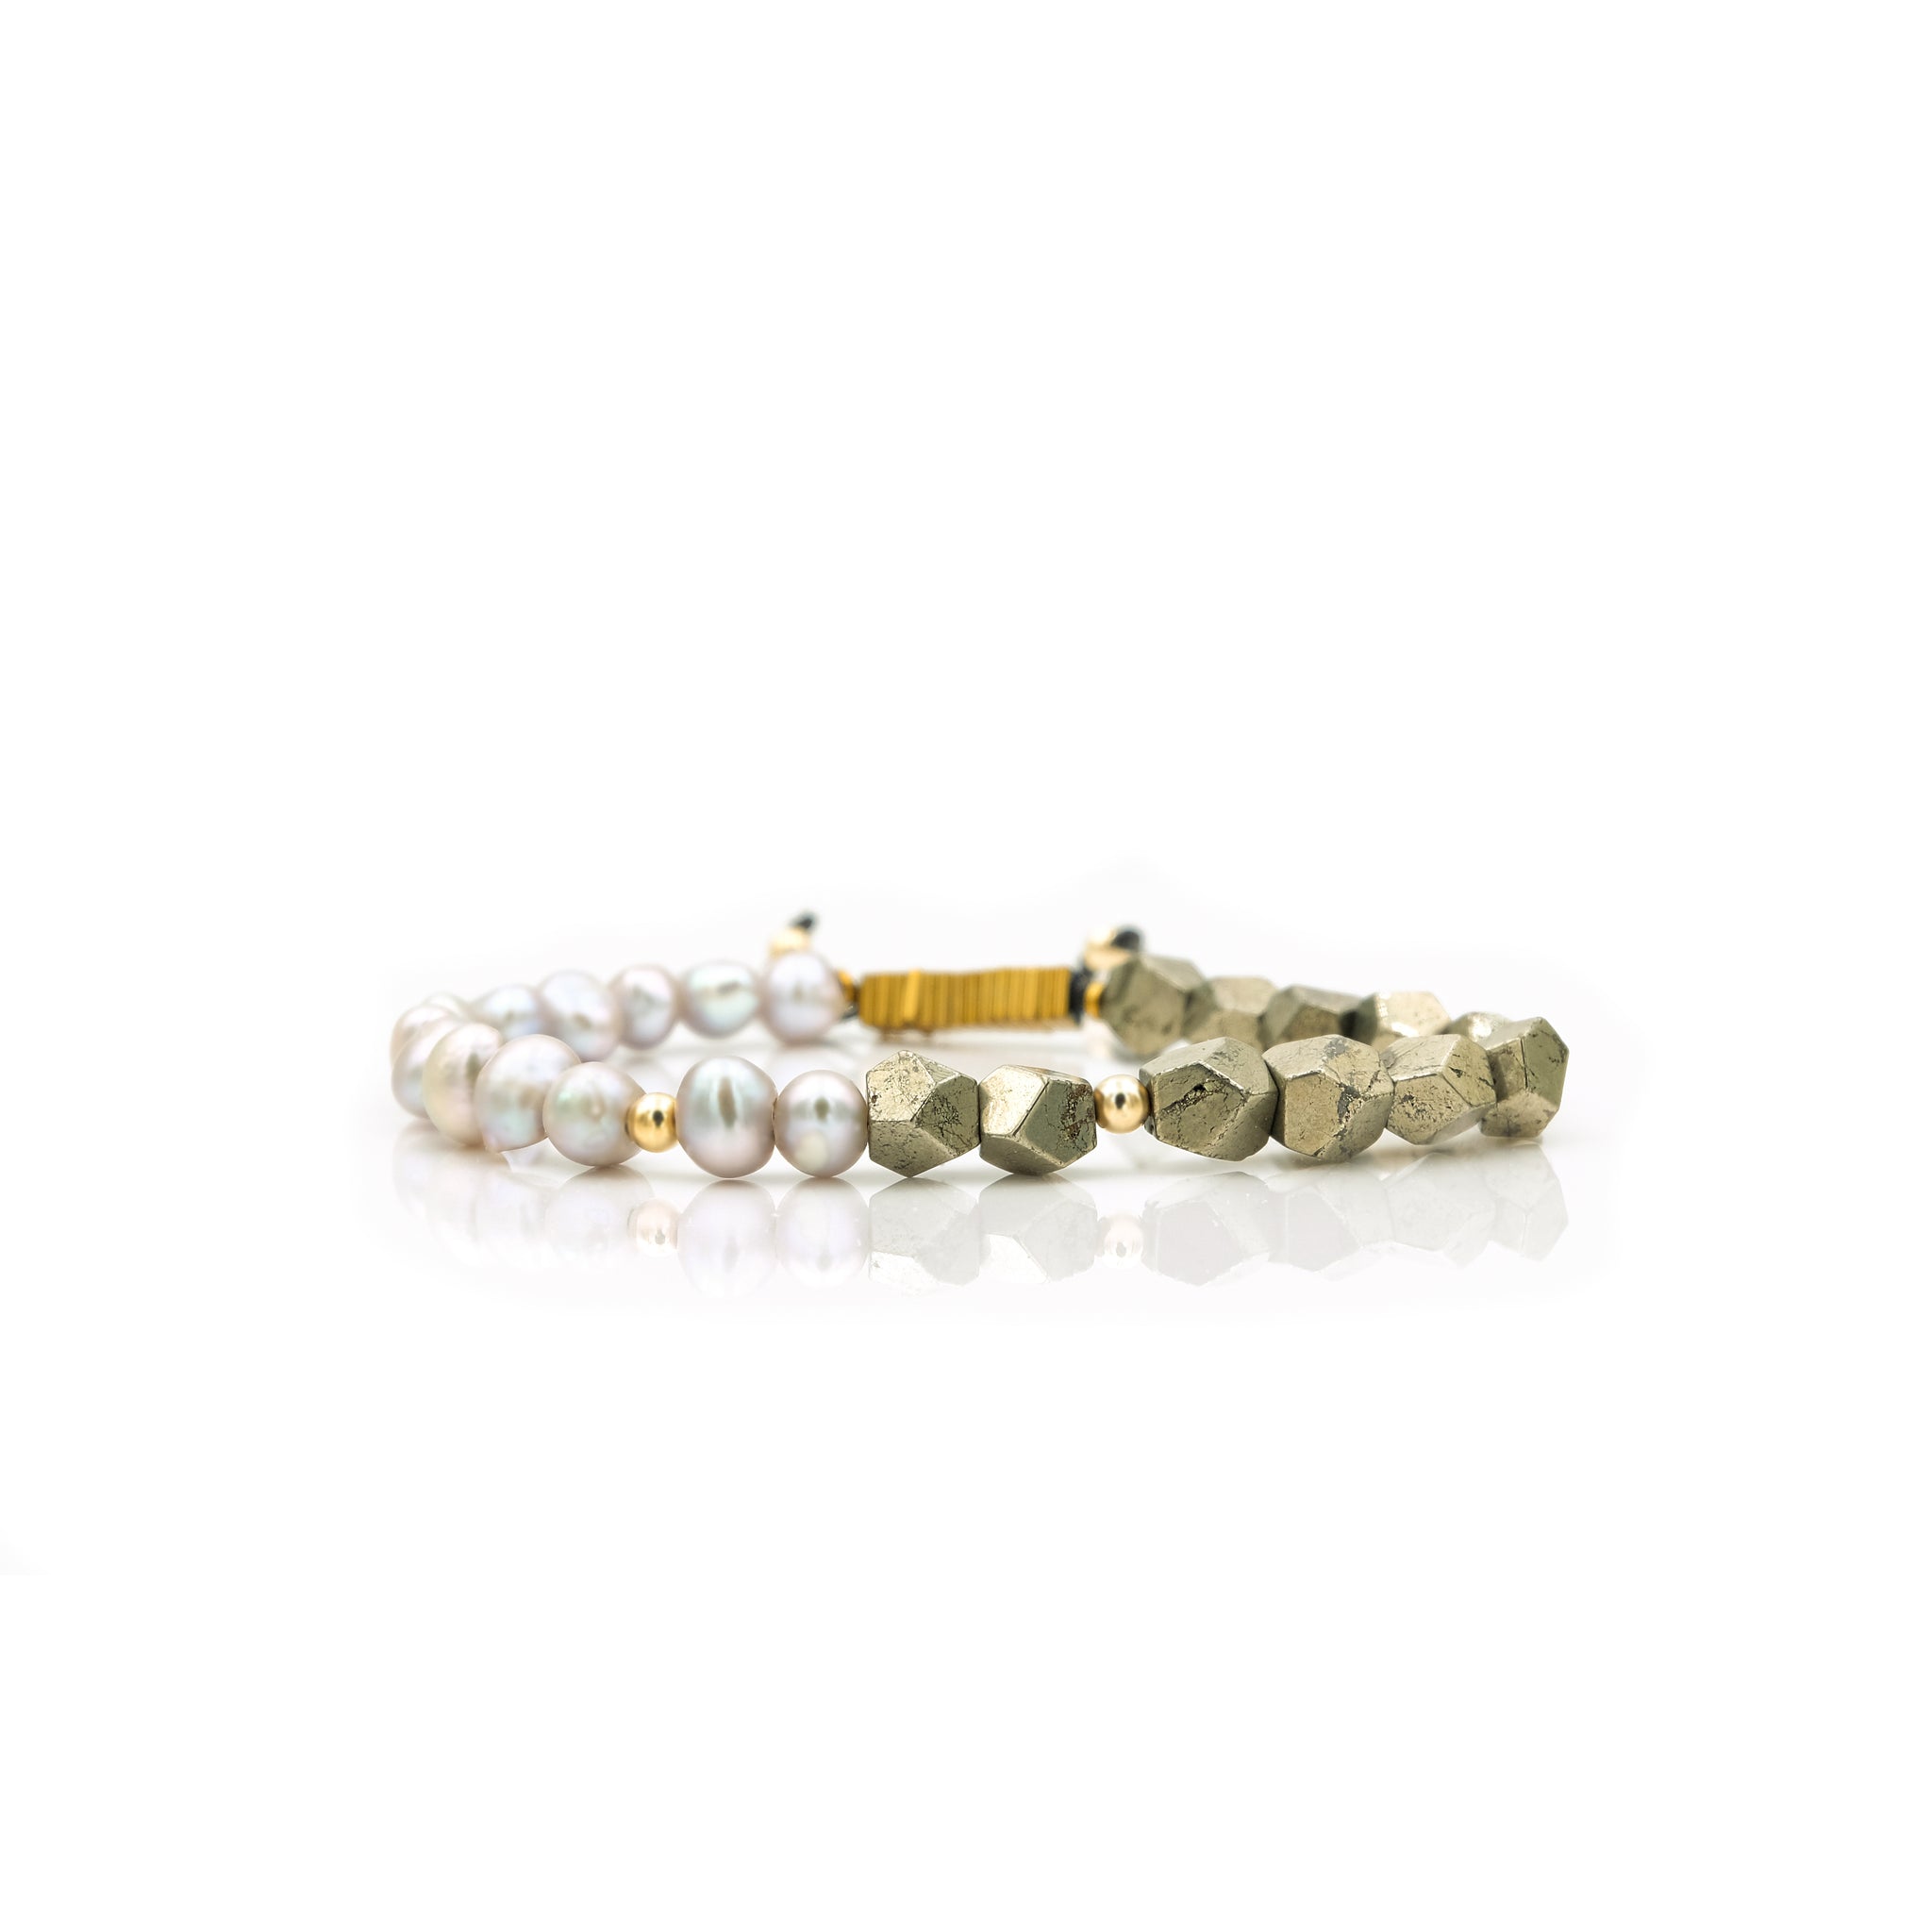 Sapphire and Freshwater Pearls Bracelet | Sapphire bracelet, Beautiful  bracelet, Pearl bracelet gold